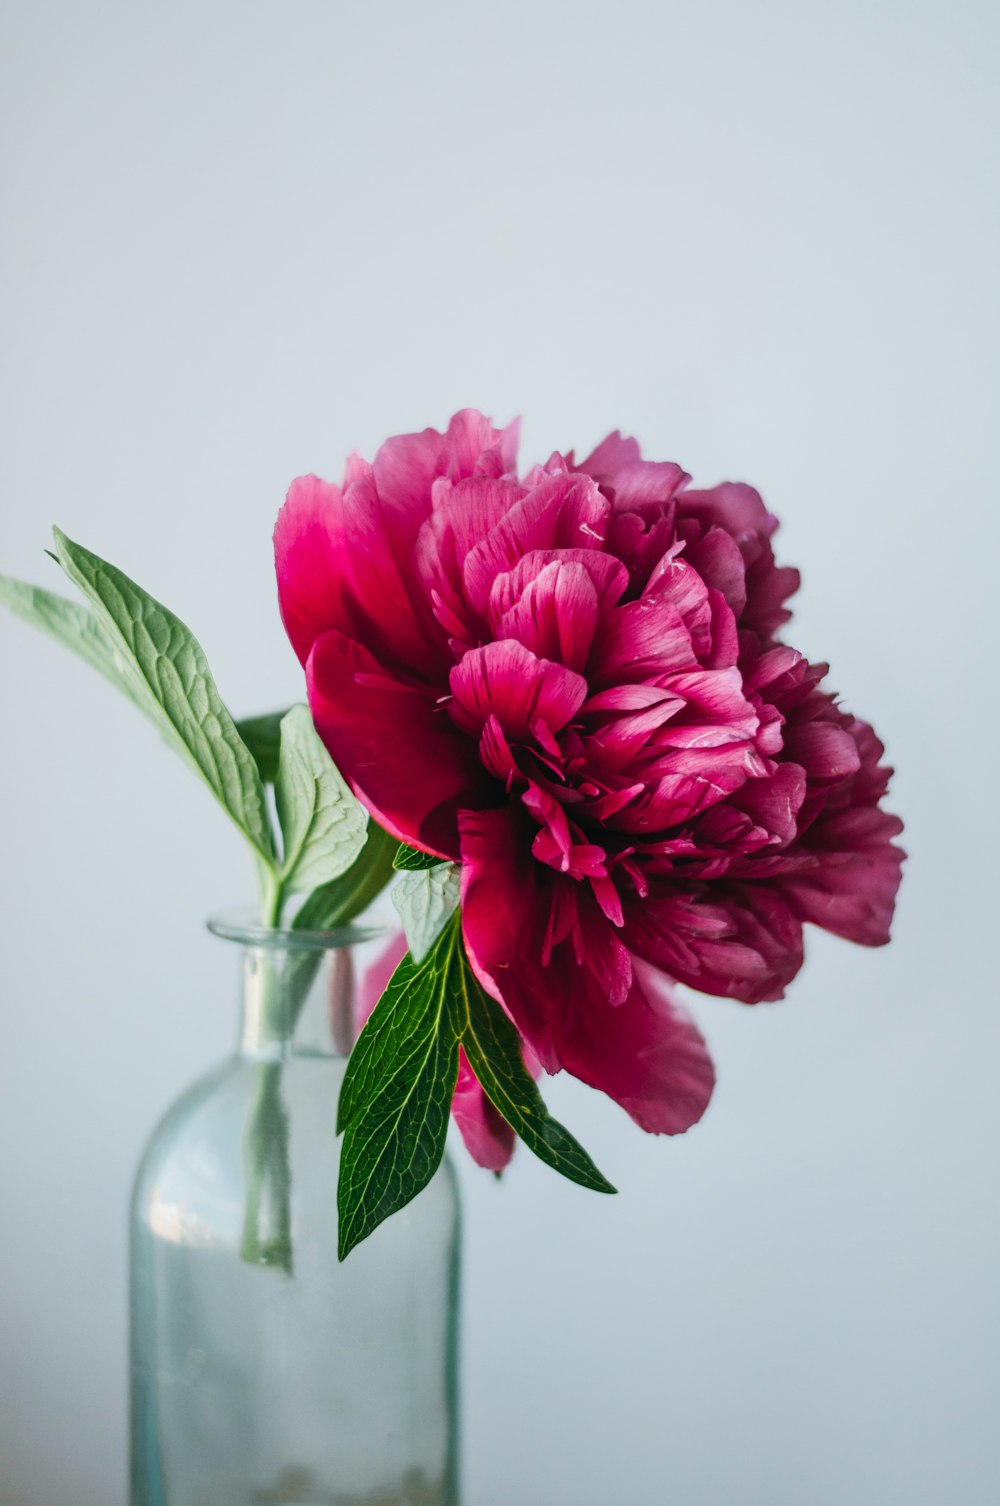 500+ Peony Pictures [HD] | Download Free Images & Stock Photos on Unsplash